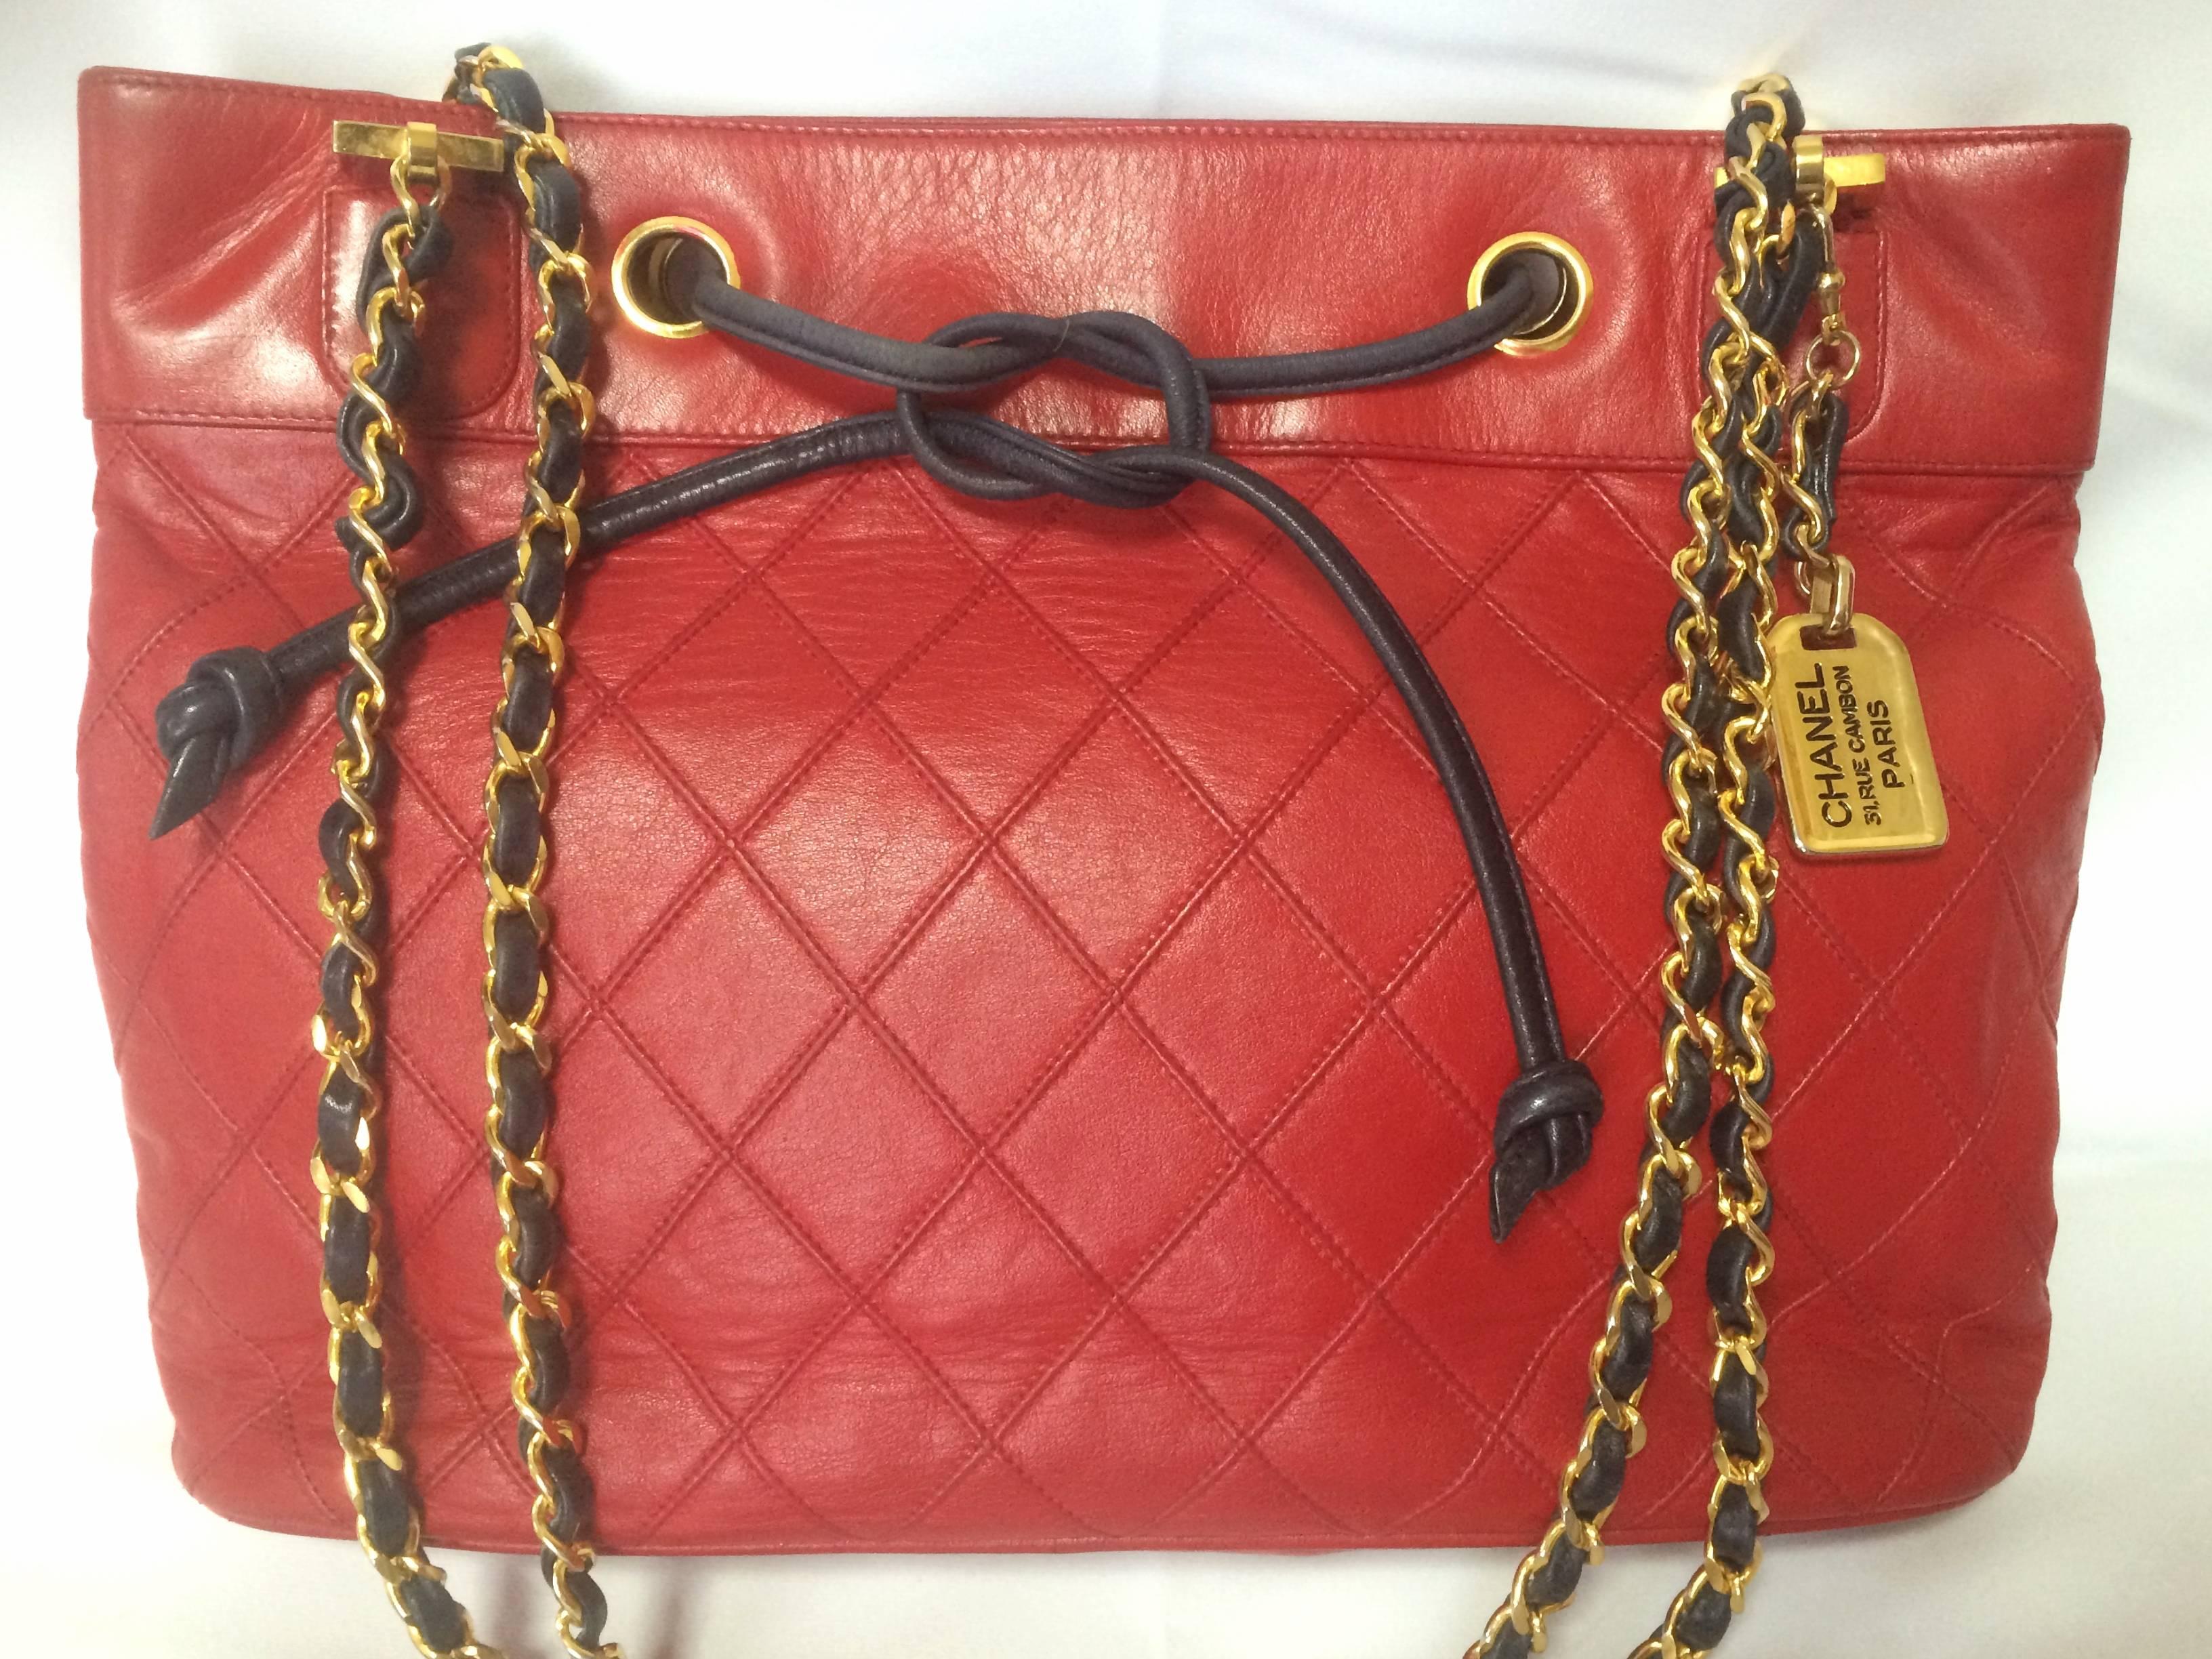 1980s. Vintage CHANEL classic tote bag in red leather with gold tone chain and navy blue leather straps and logo CC charm plate. Rare bag

Vintage Chanel lipstick red calfskin chain shoulder tote bag with navy drawstrings and golden square CC